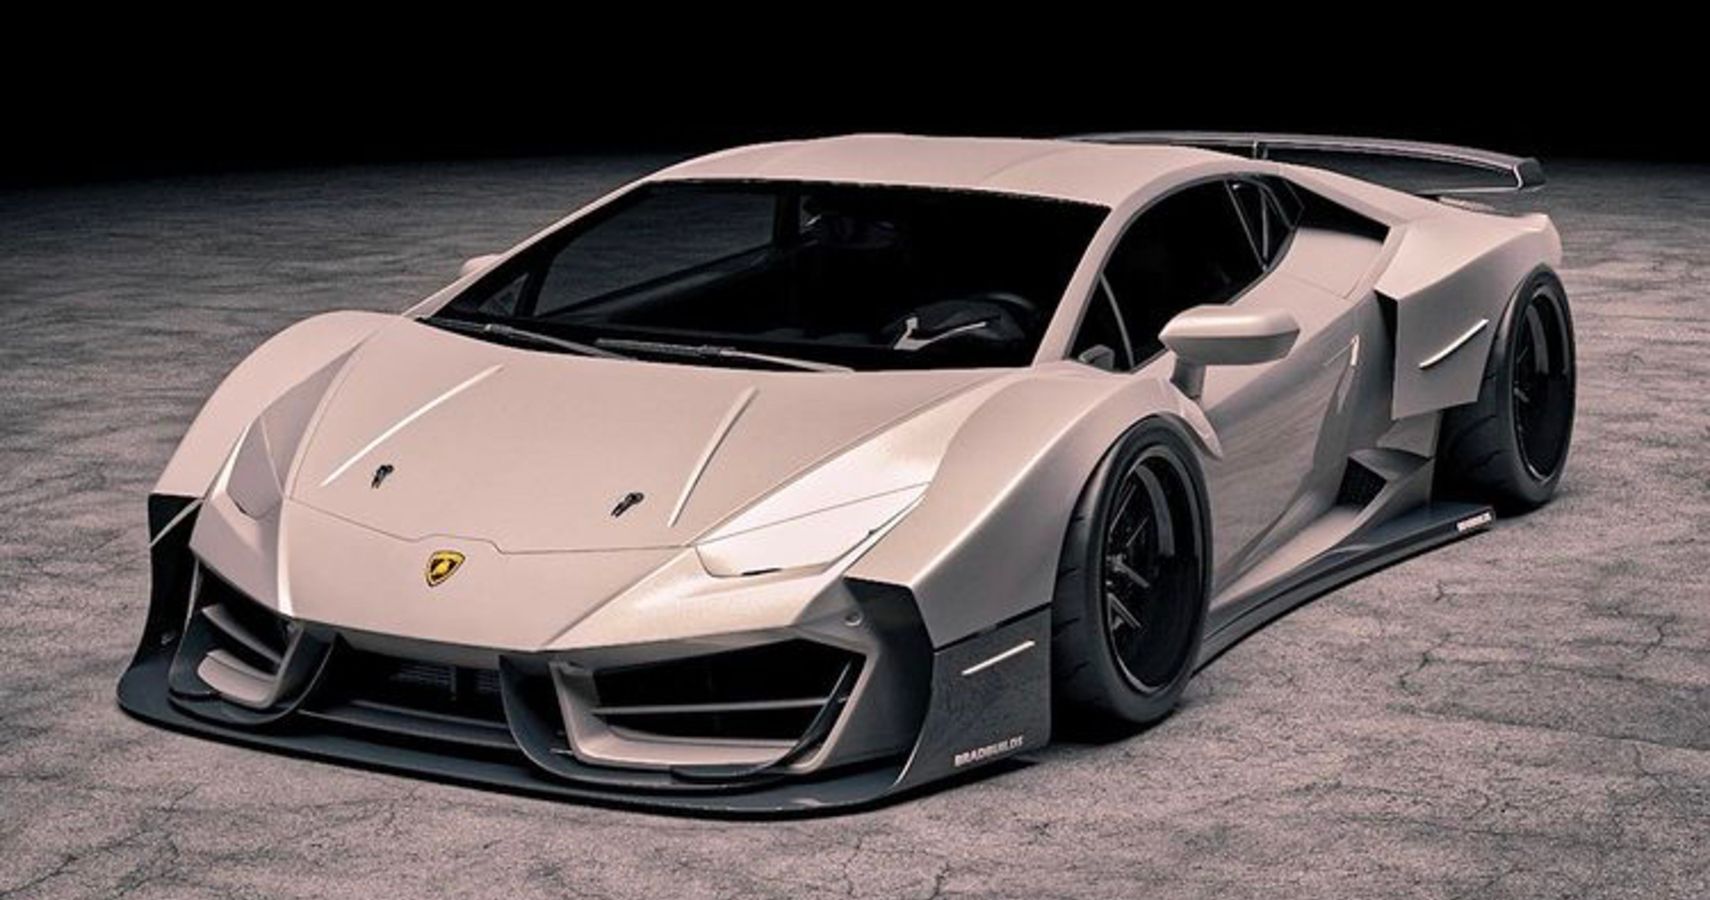 Digital Artist BradBuilds shows what happens when the Huracan is combined with Lamborghini's most advanced concept car